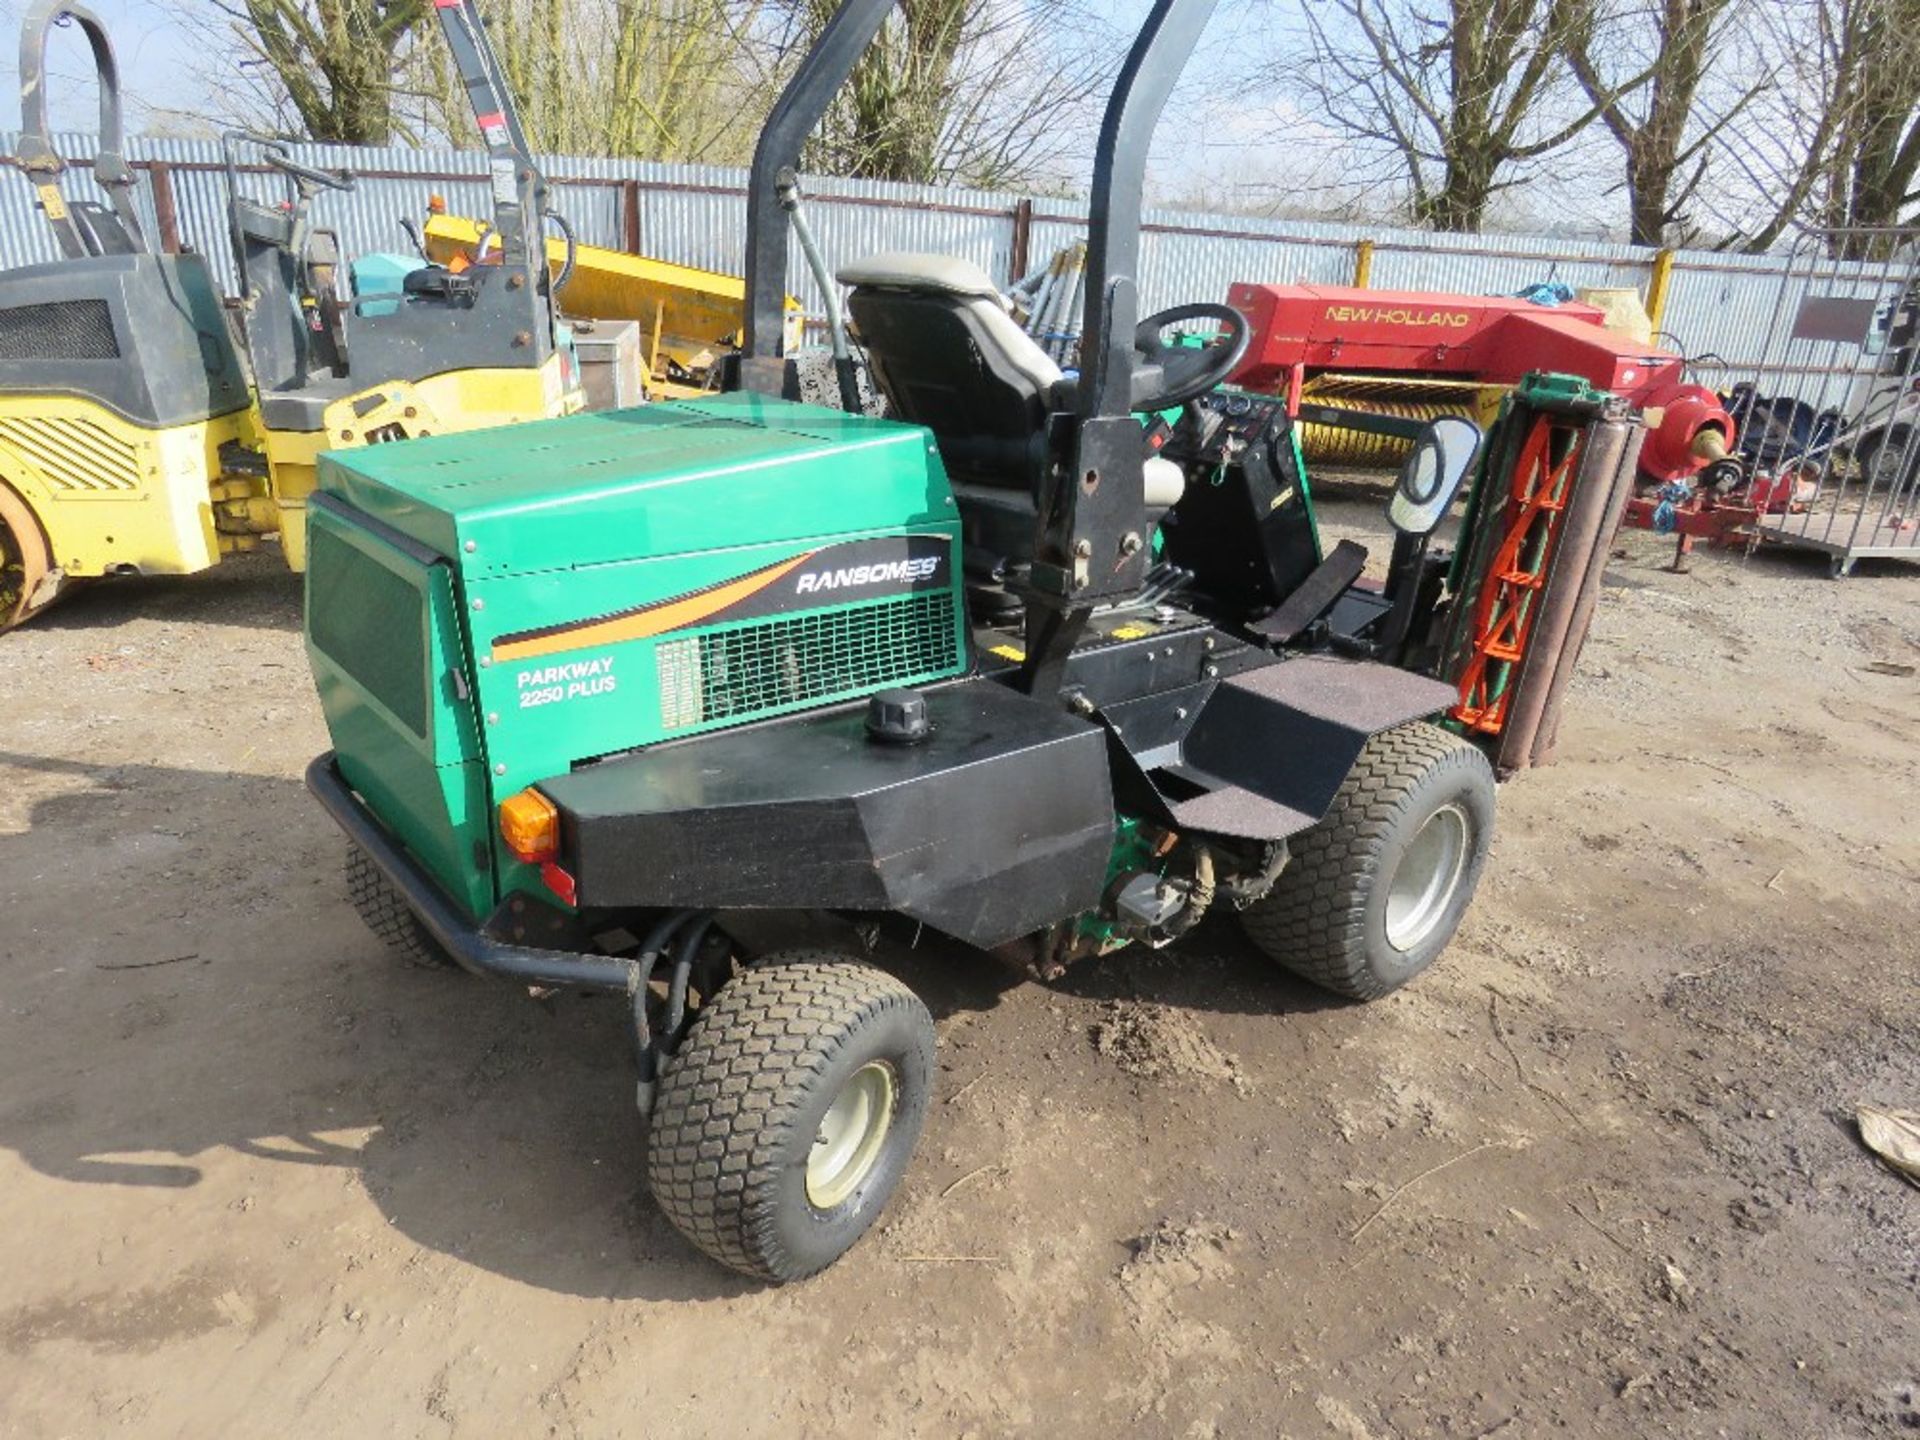 RANSOMES PARKWAY 2250 PLUS PROFESSIONAL TRIPLE RIDE ON MOWER, 4WD, 3300 REC HOURS. DIRECT FROM GOLF - Image 3 of 11